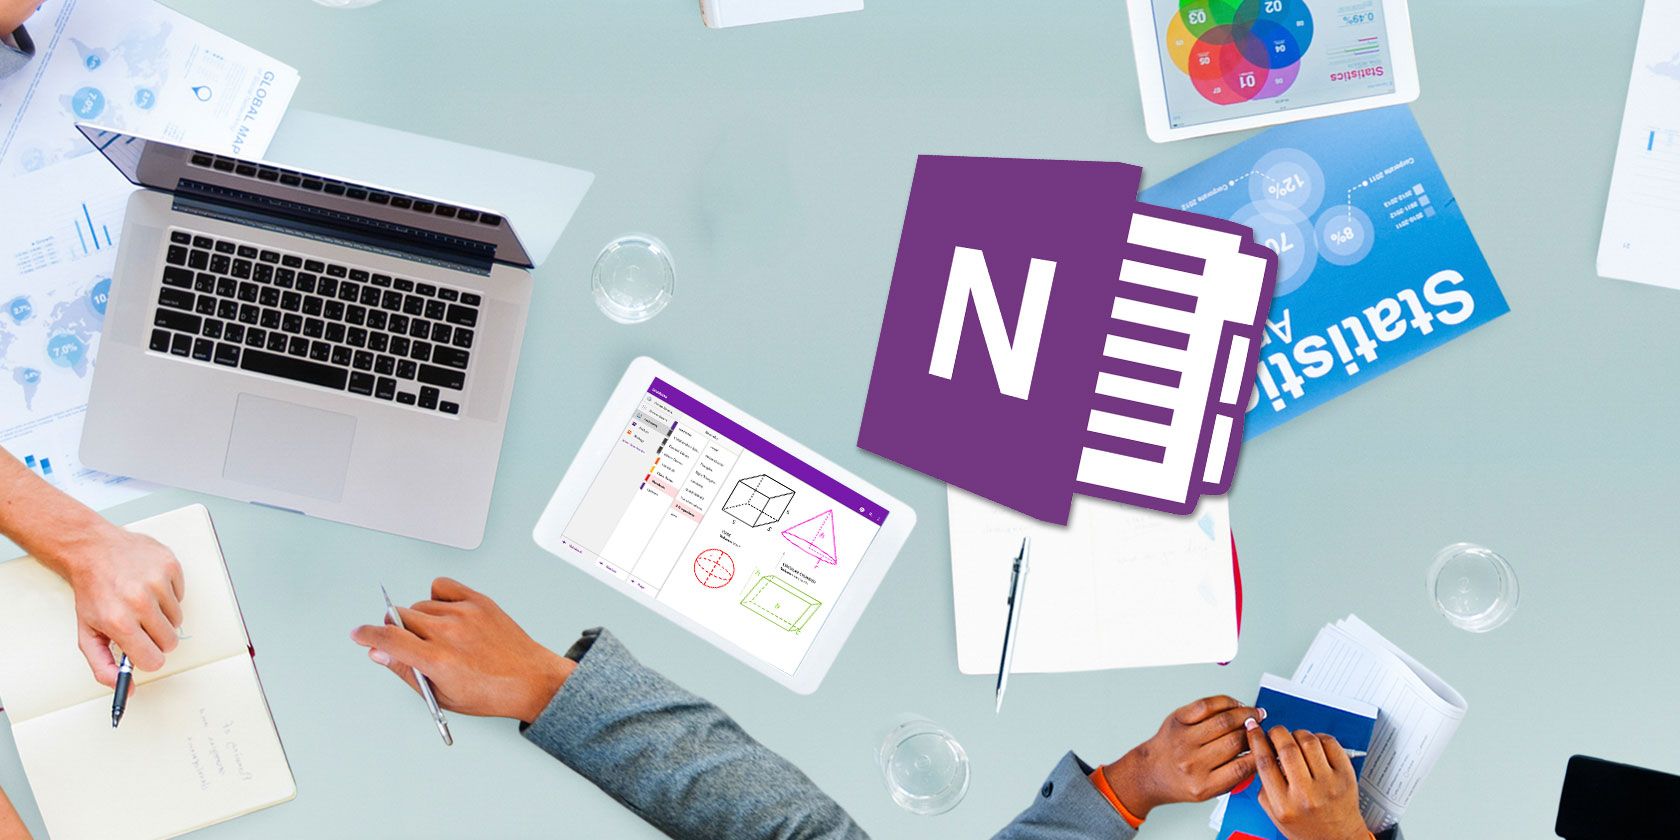 disable onenote quick note